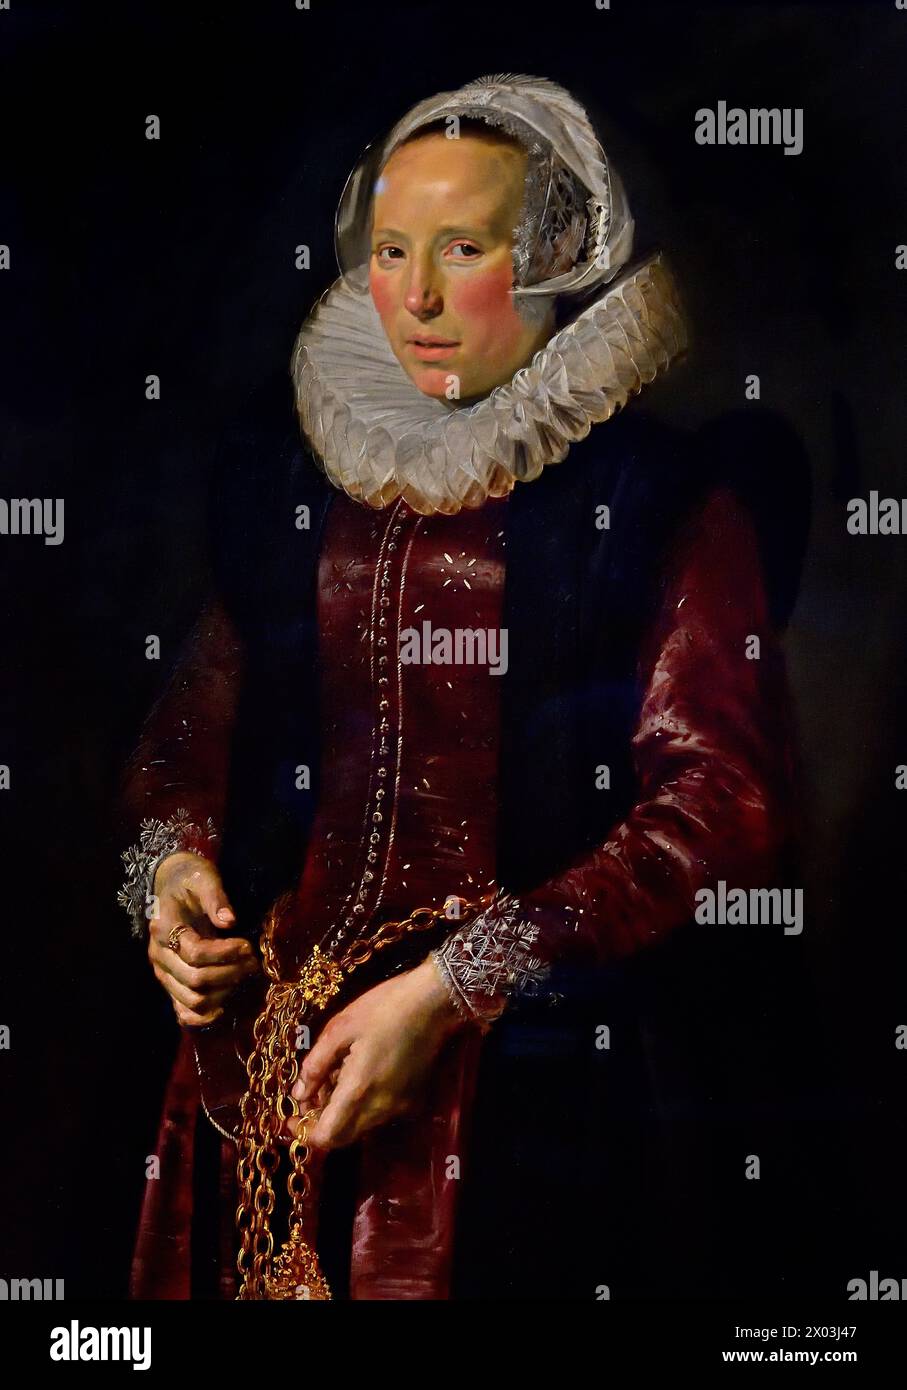 Portrait of a woman 1612 Frans Hals, 1582-1666, Antwerp- Haarlem,  Dutch, The Netherlands, 17th century, Dutch Golden Age  ( She wears a lace-trimmed cap, a black silk dress, a ruff, and lace wristbands. To the left is a coat-of-arms ) Stock Photo